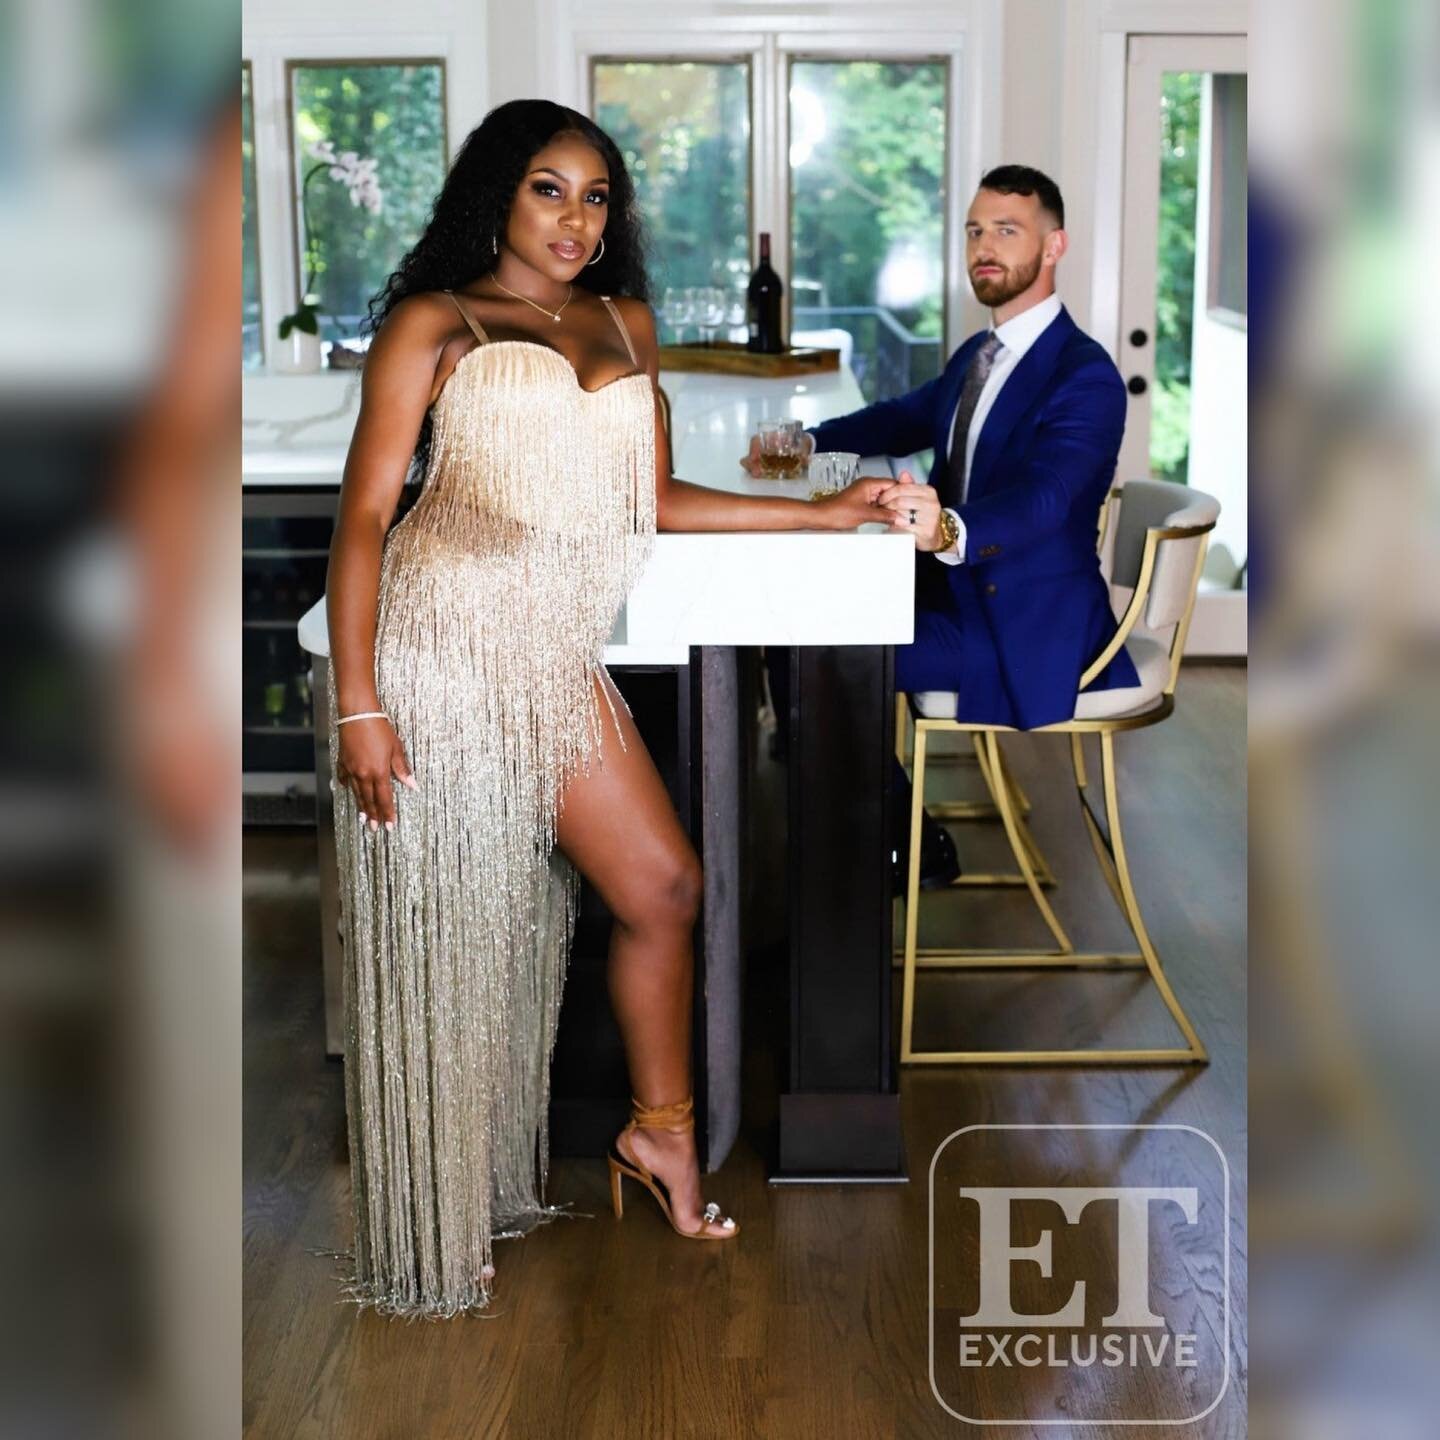 What&rsquo;s a housewife without a REUNION DRESS!? 💡
Check out this picture perfect #powercouple y&rsquo;all!! 😍 This look had to be my favorite for both @need4lspeed and @cameronreidhamilton 👏🏾 
💙🙏🏾
Thank you @arega_us! We were EXTRA careful 